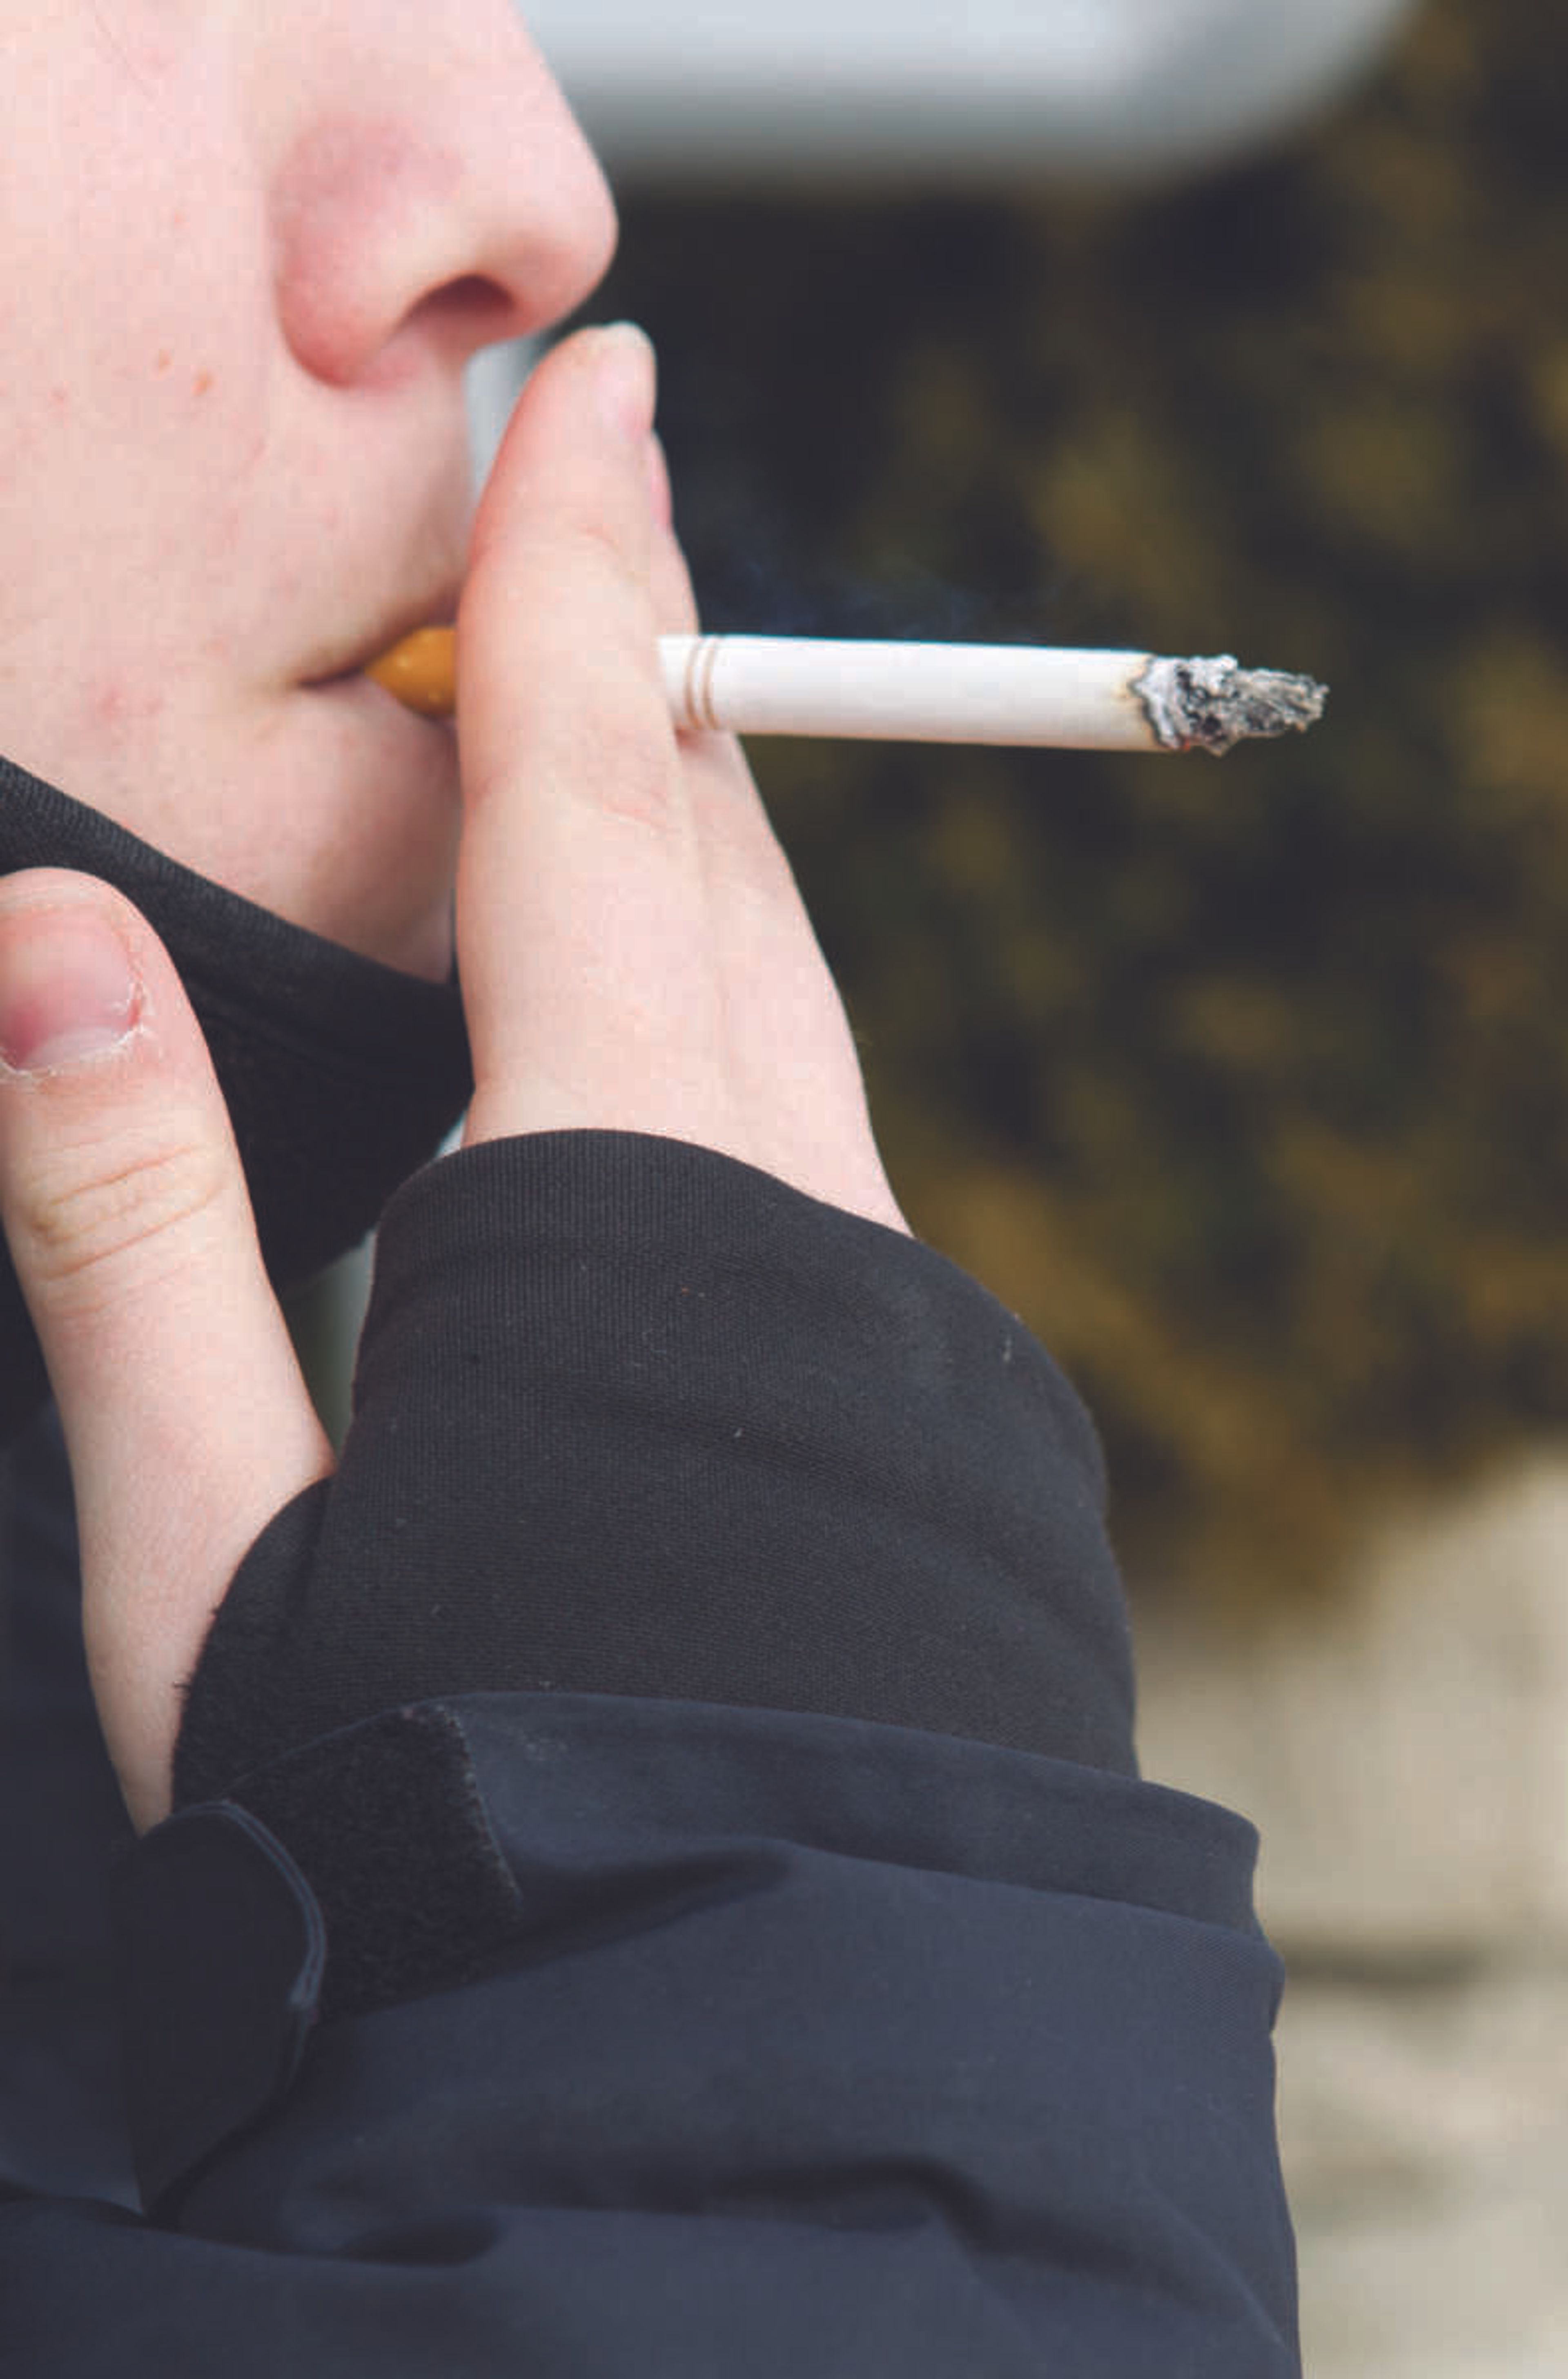 Southeast launches campus-wide smoking survey to evaluate policies